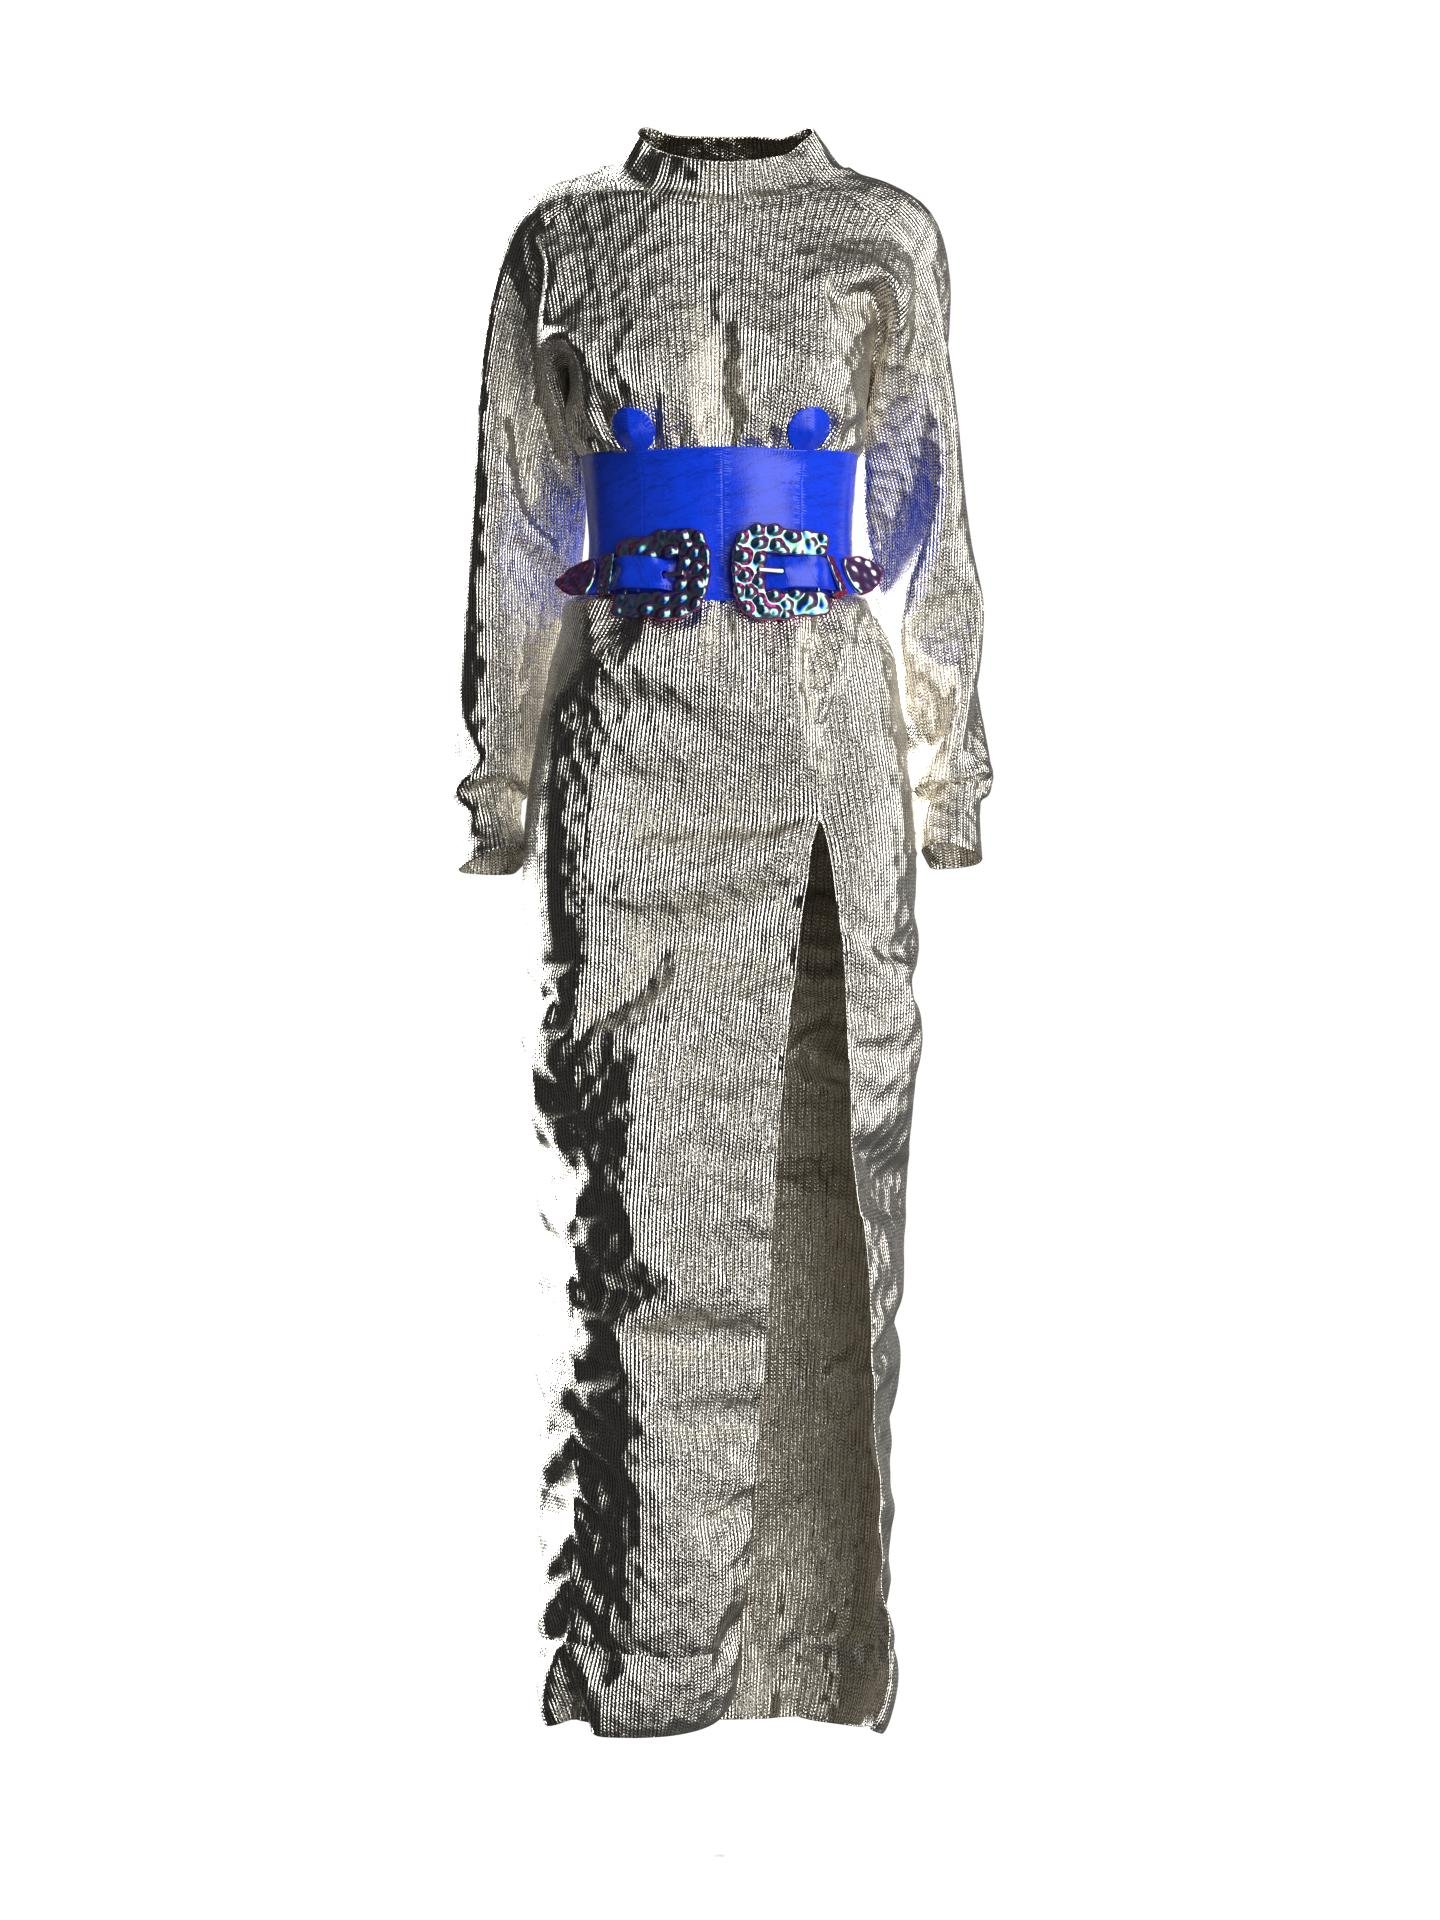 Look 3 Silver Electric by ASCHNO